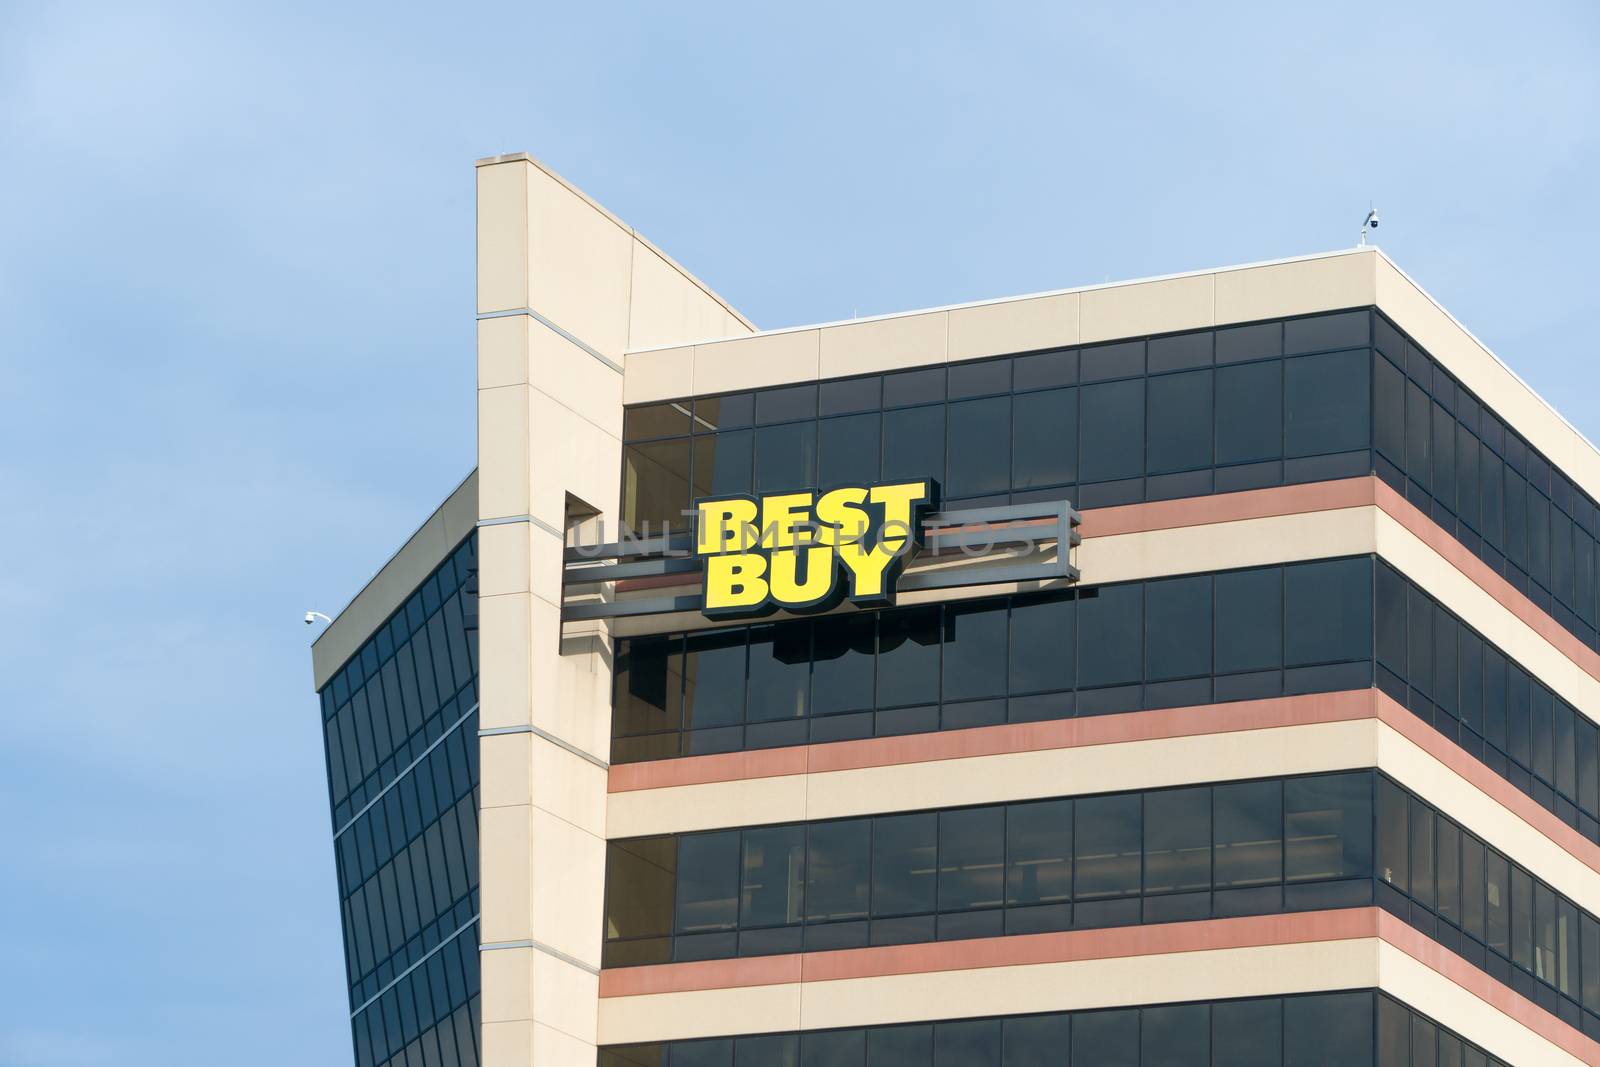 Best Buy Corporate Headquarters Building by wolterk